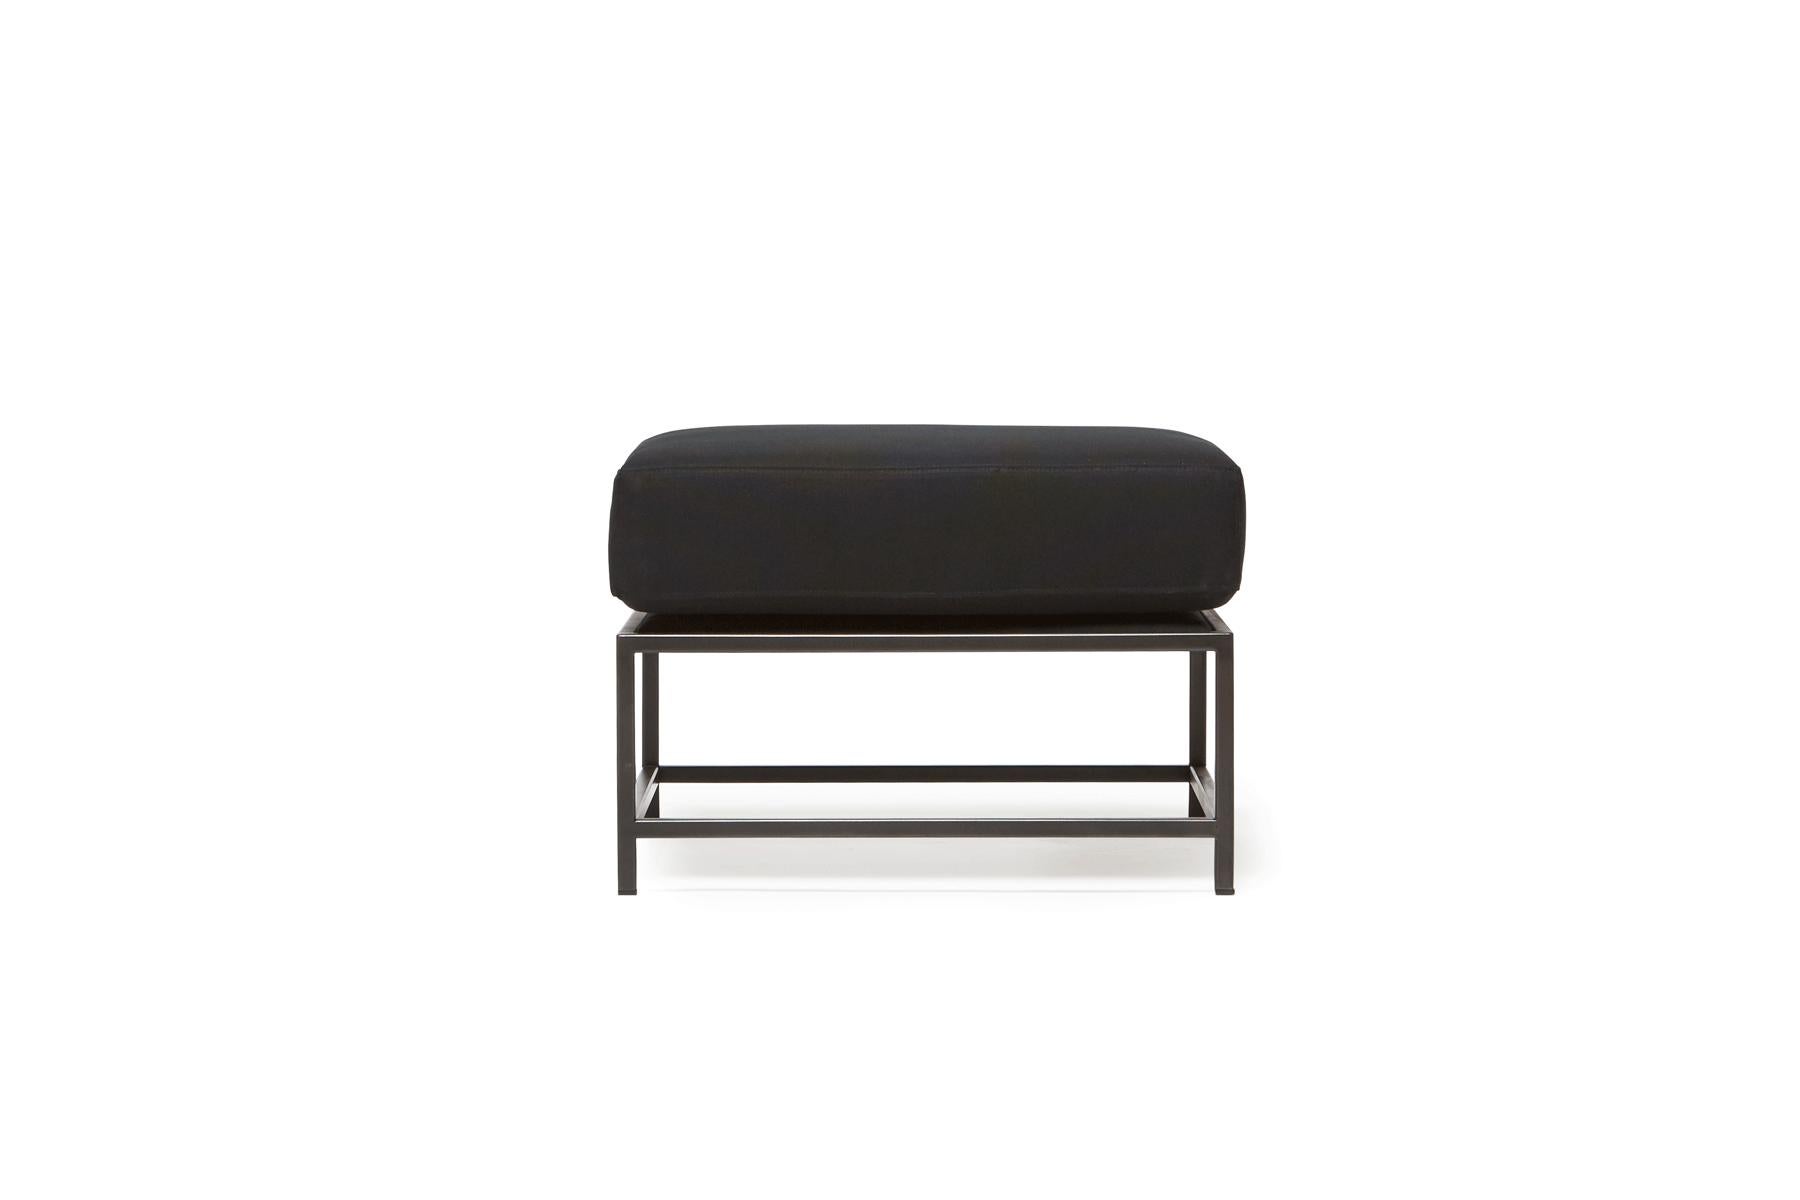 Designed to pair with any of the Inheritance Seating options, the Ottoman is a great addition to add a lounge element to your seating arrangement. 

This variation is upholstered in rich black canvas. The foam seat cushions have been wrapped in